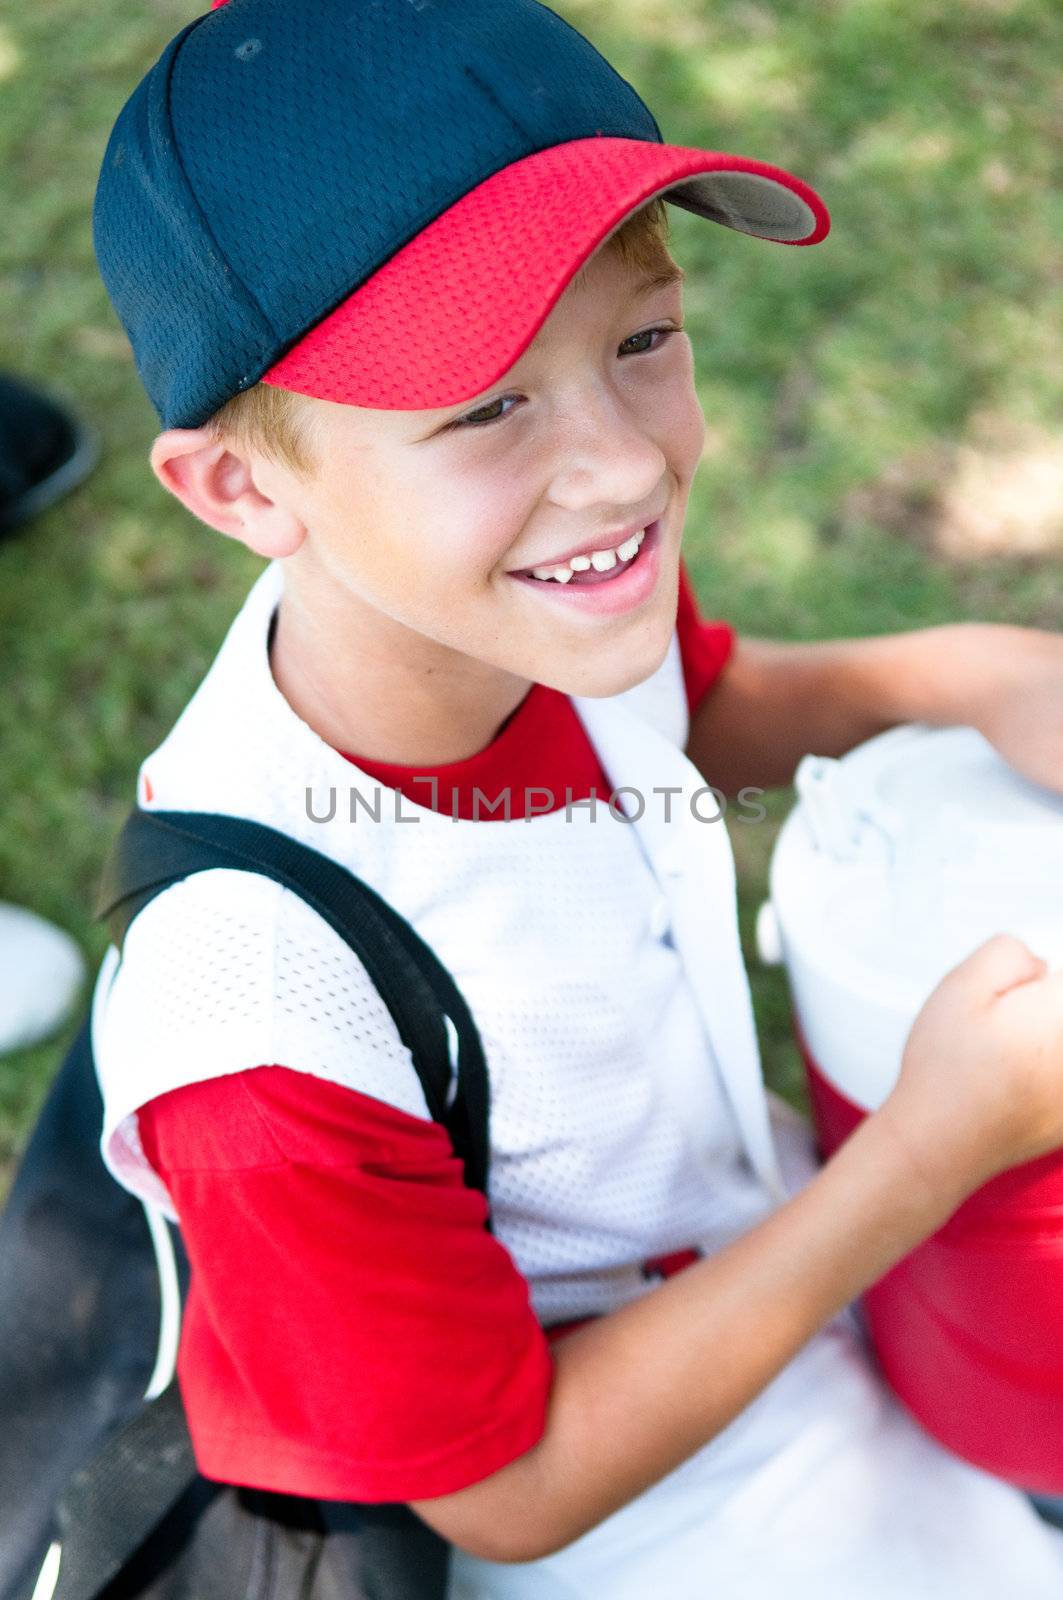 Little league baseball player happy after winning the game.